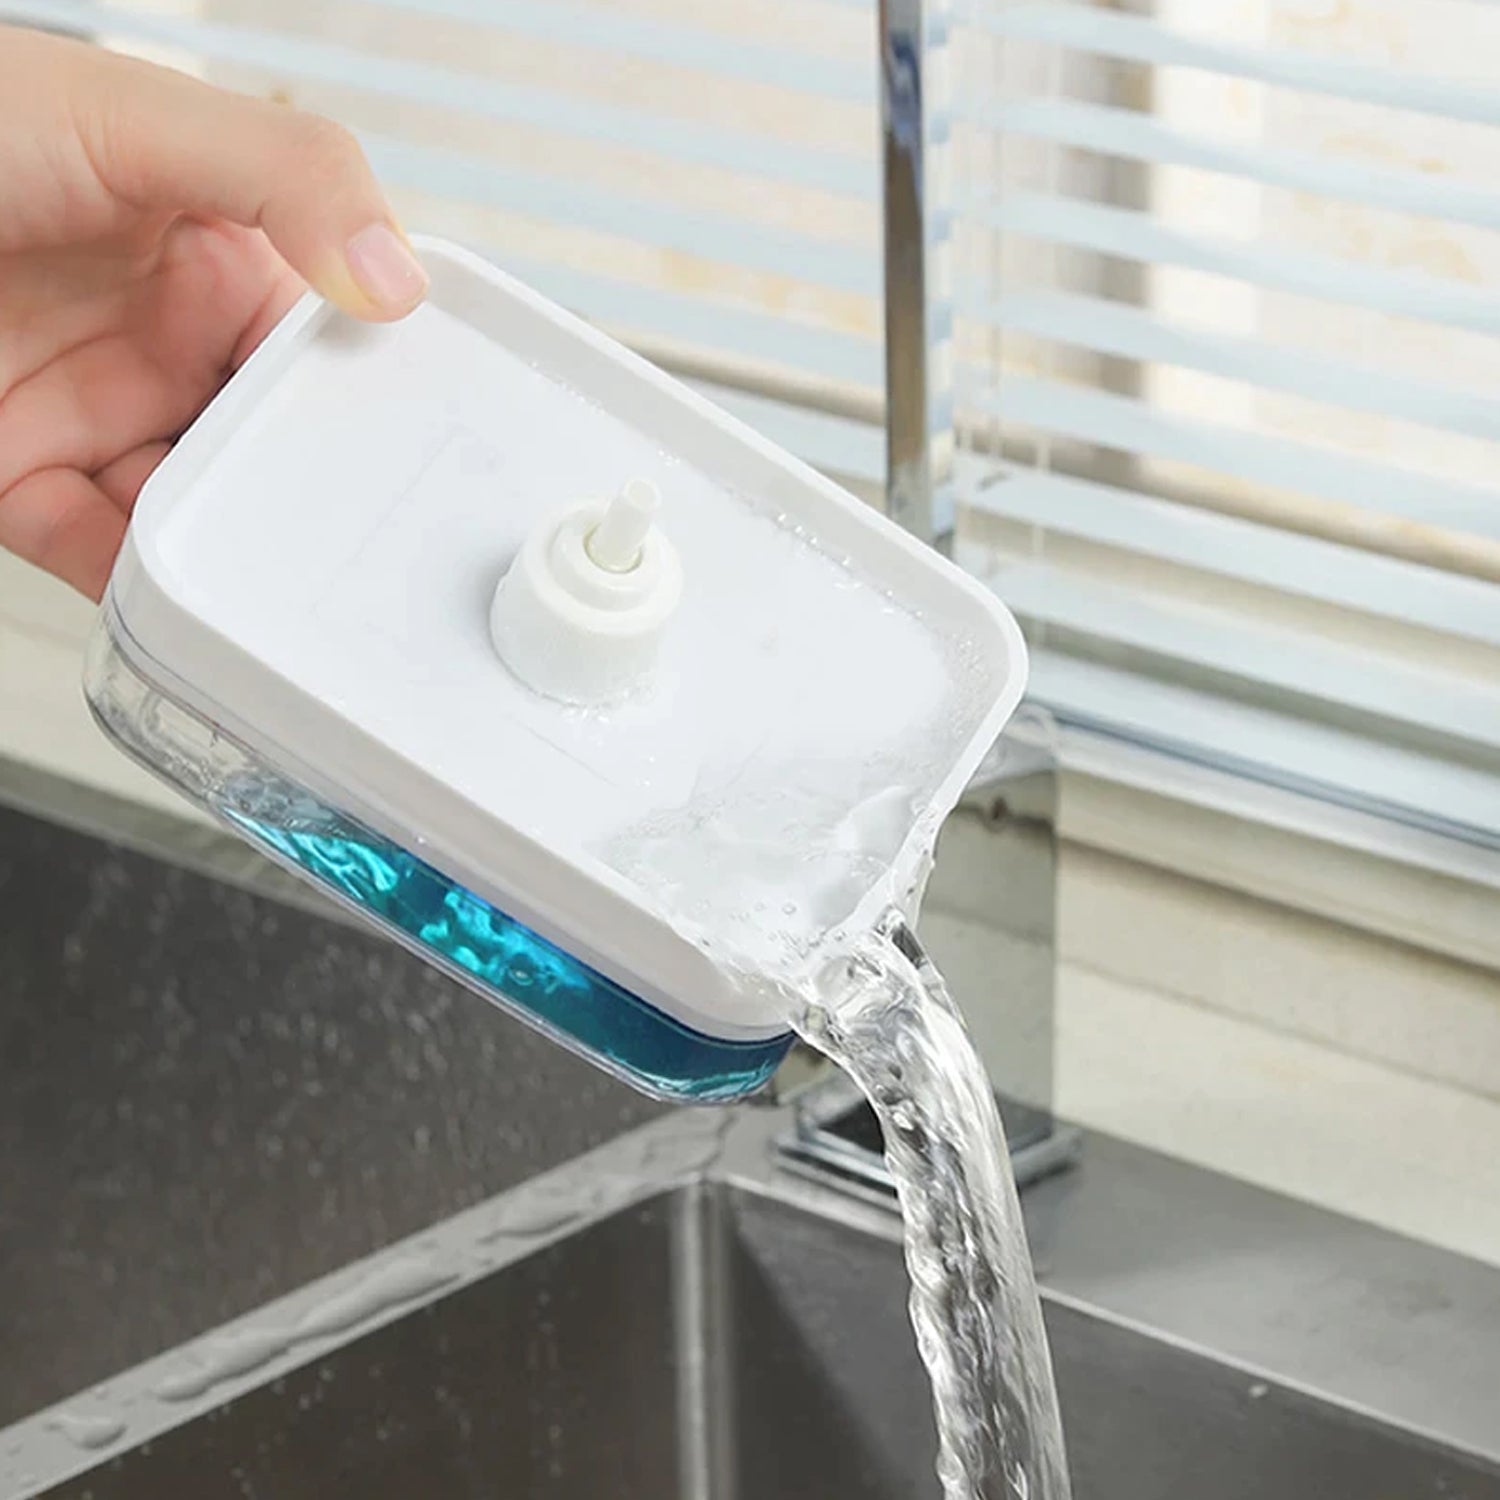 6206 2 in 1 Soap Dispenser Used As A Soap Holder In Bathrooms And Toilets.